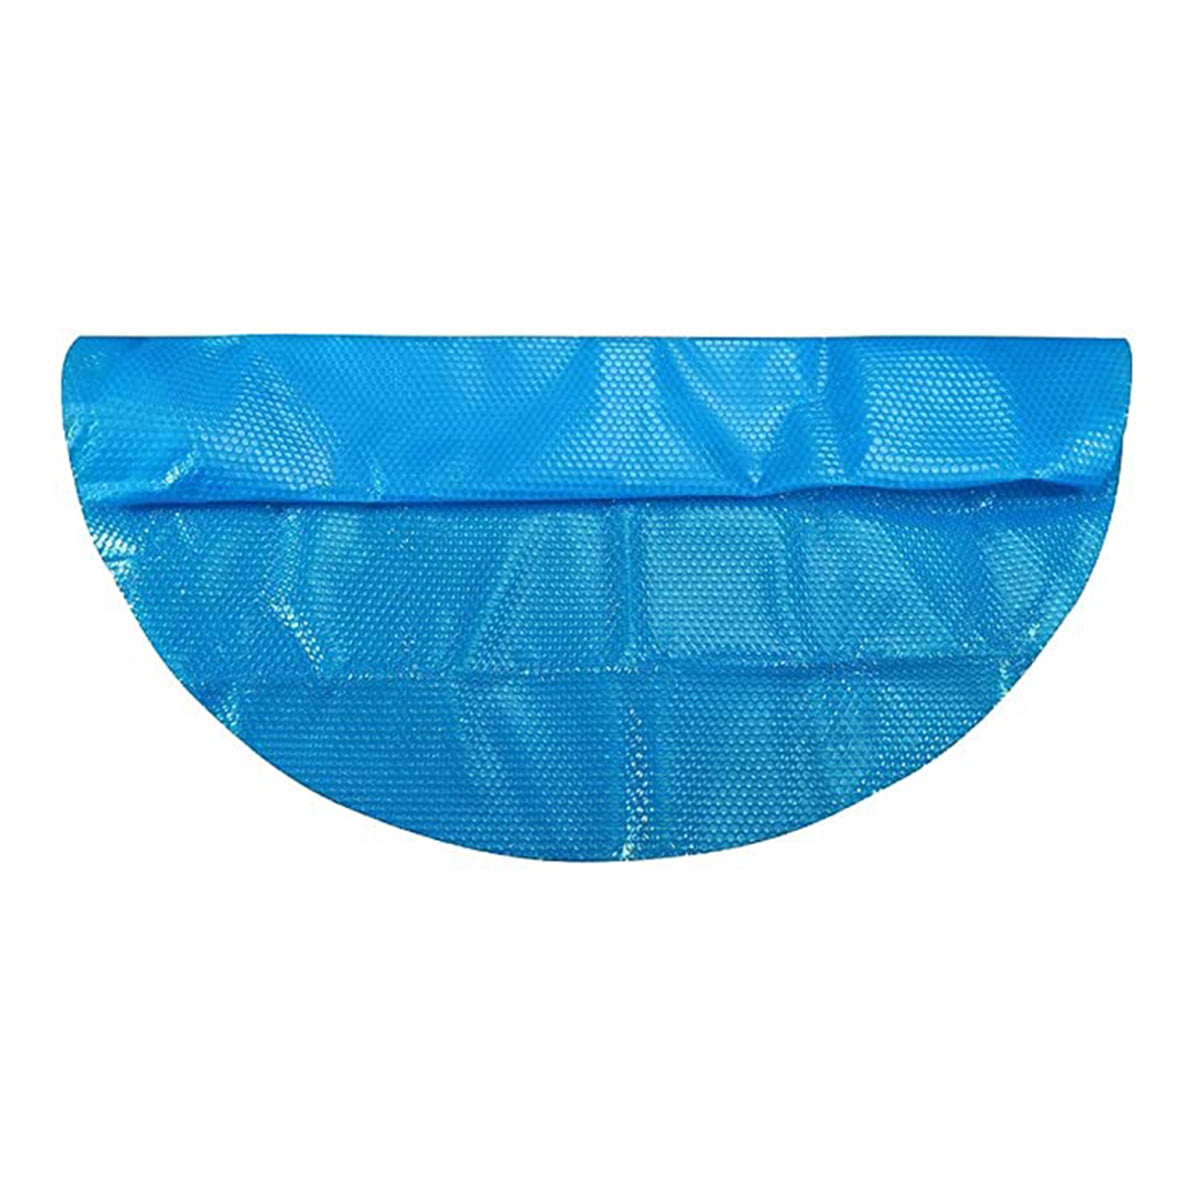 Details about   Sun2Solar 12' Round Blue Swimming Pool Solar Heater Blanket Cover 1200 Series 